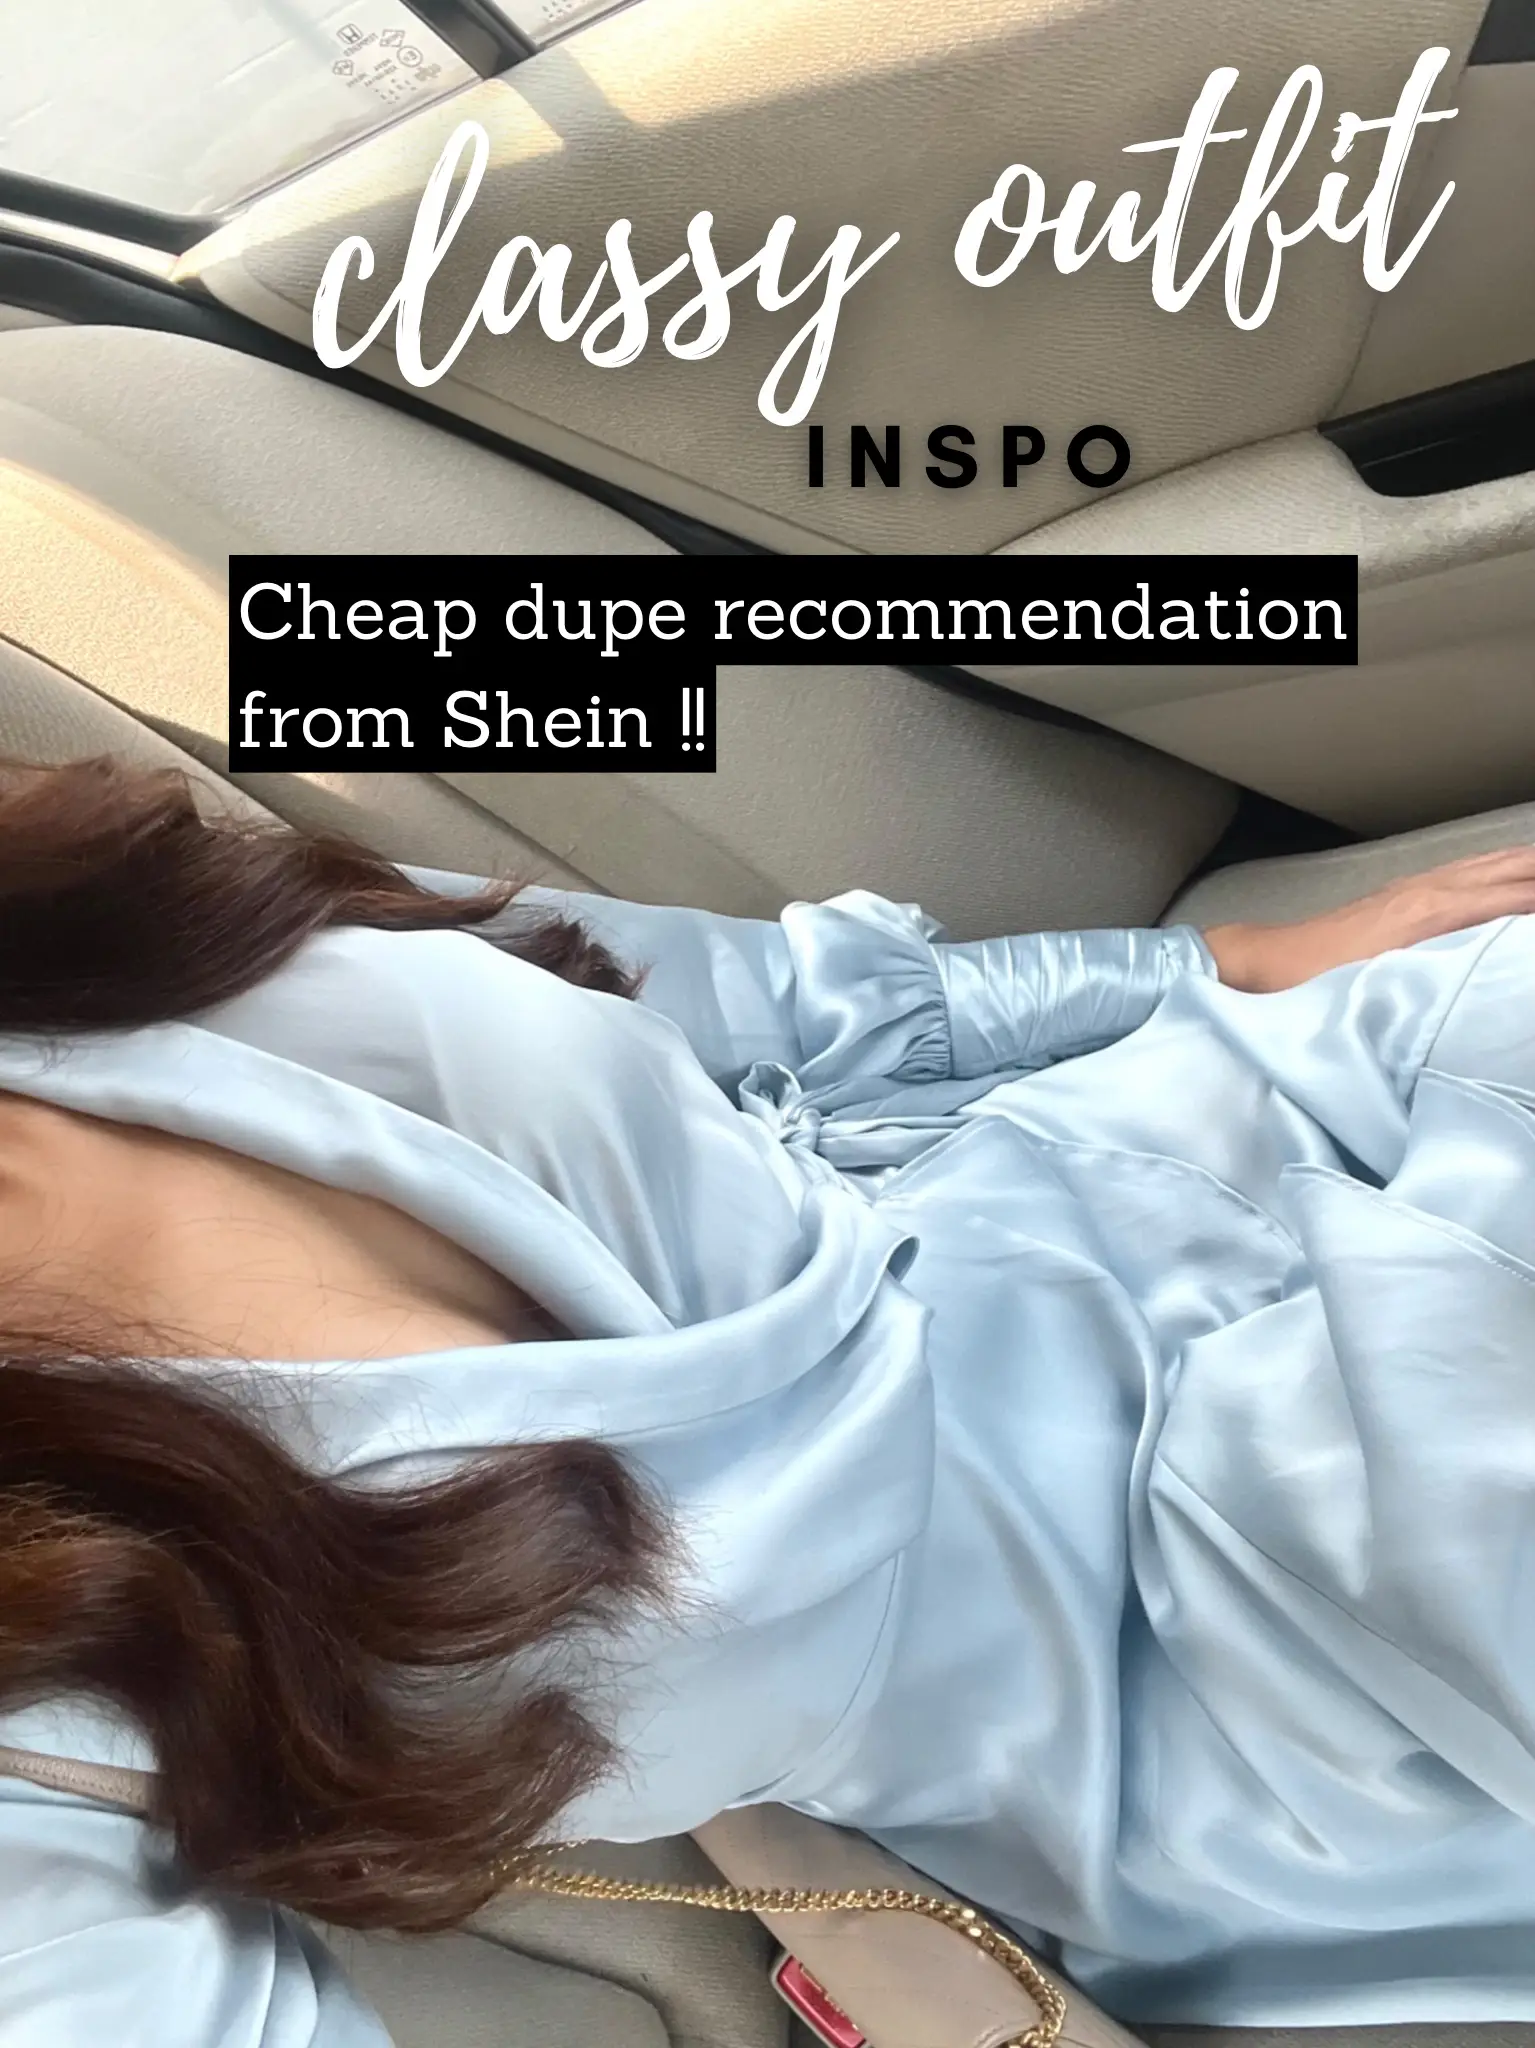 SHEIN DUPESS!!, Gallery posted by caseyy